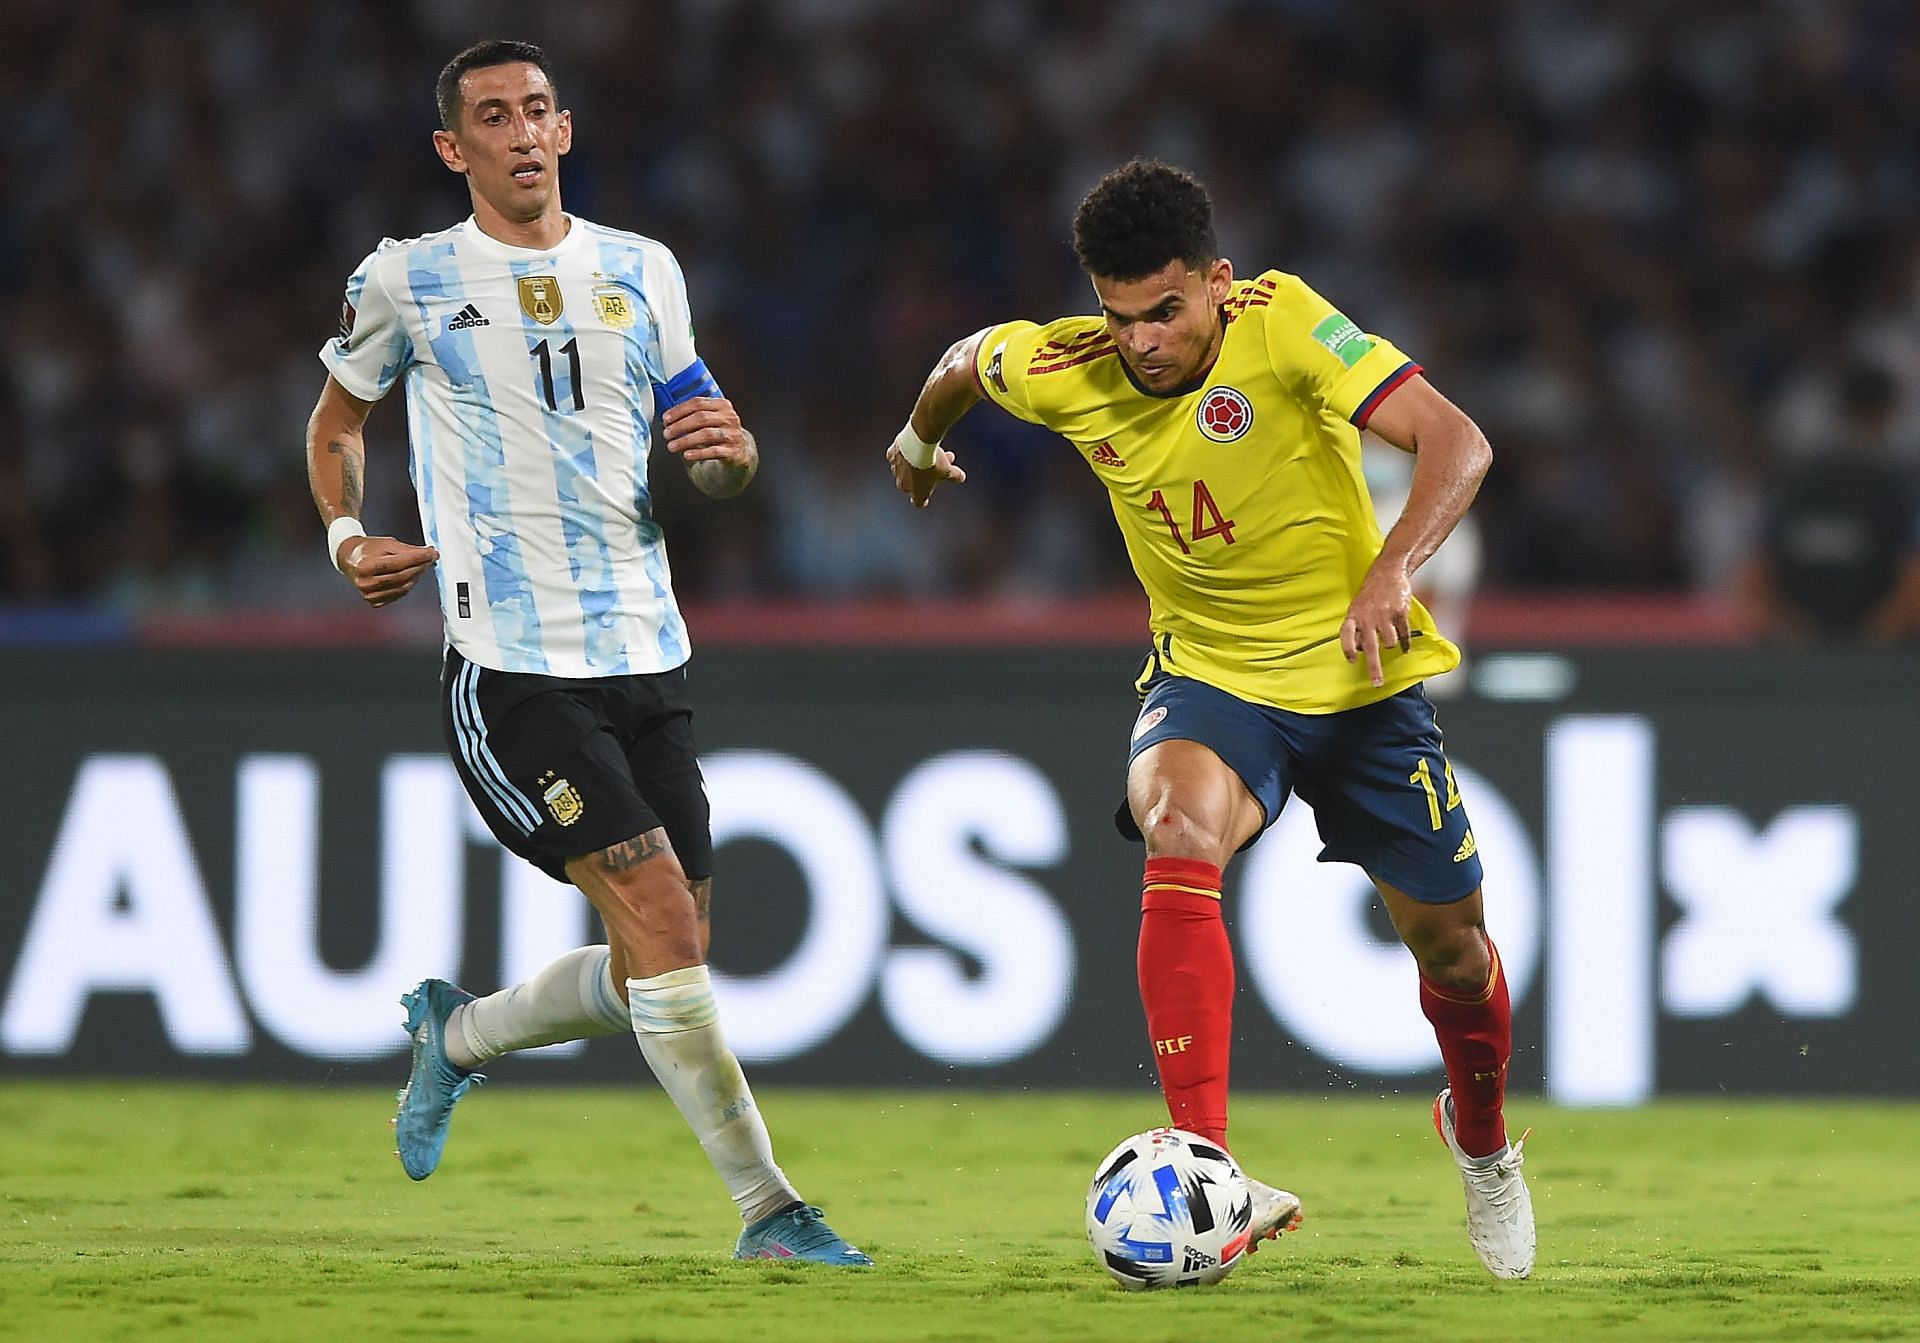 Colombia suffered a 1-0 defeat to Argentina